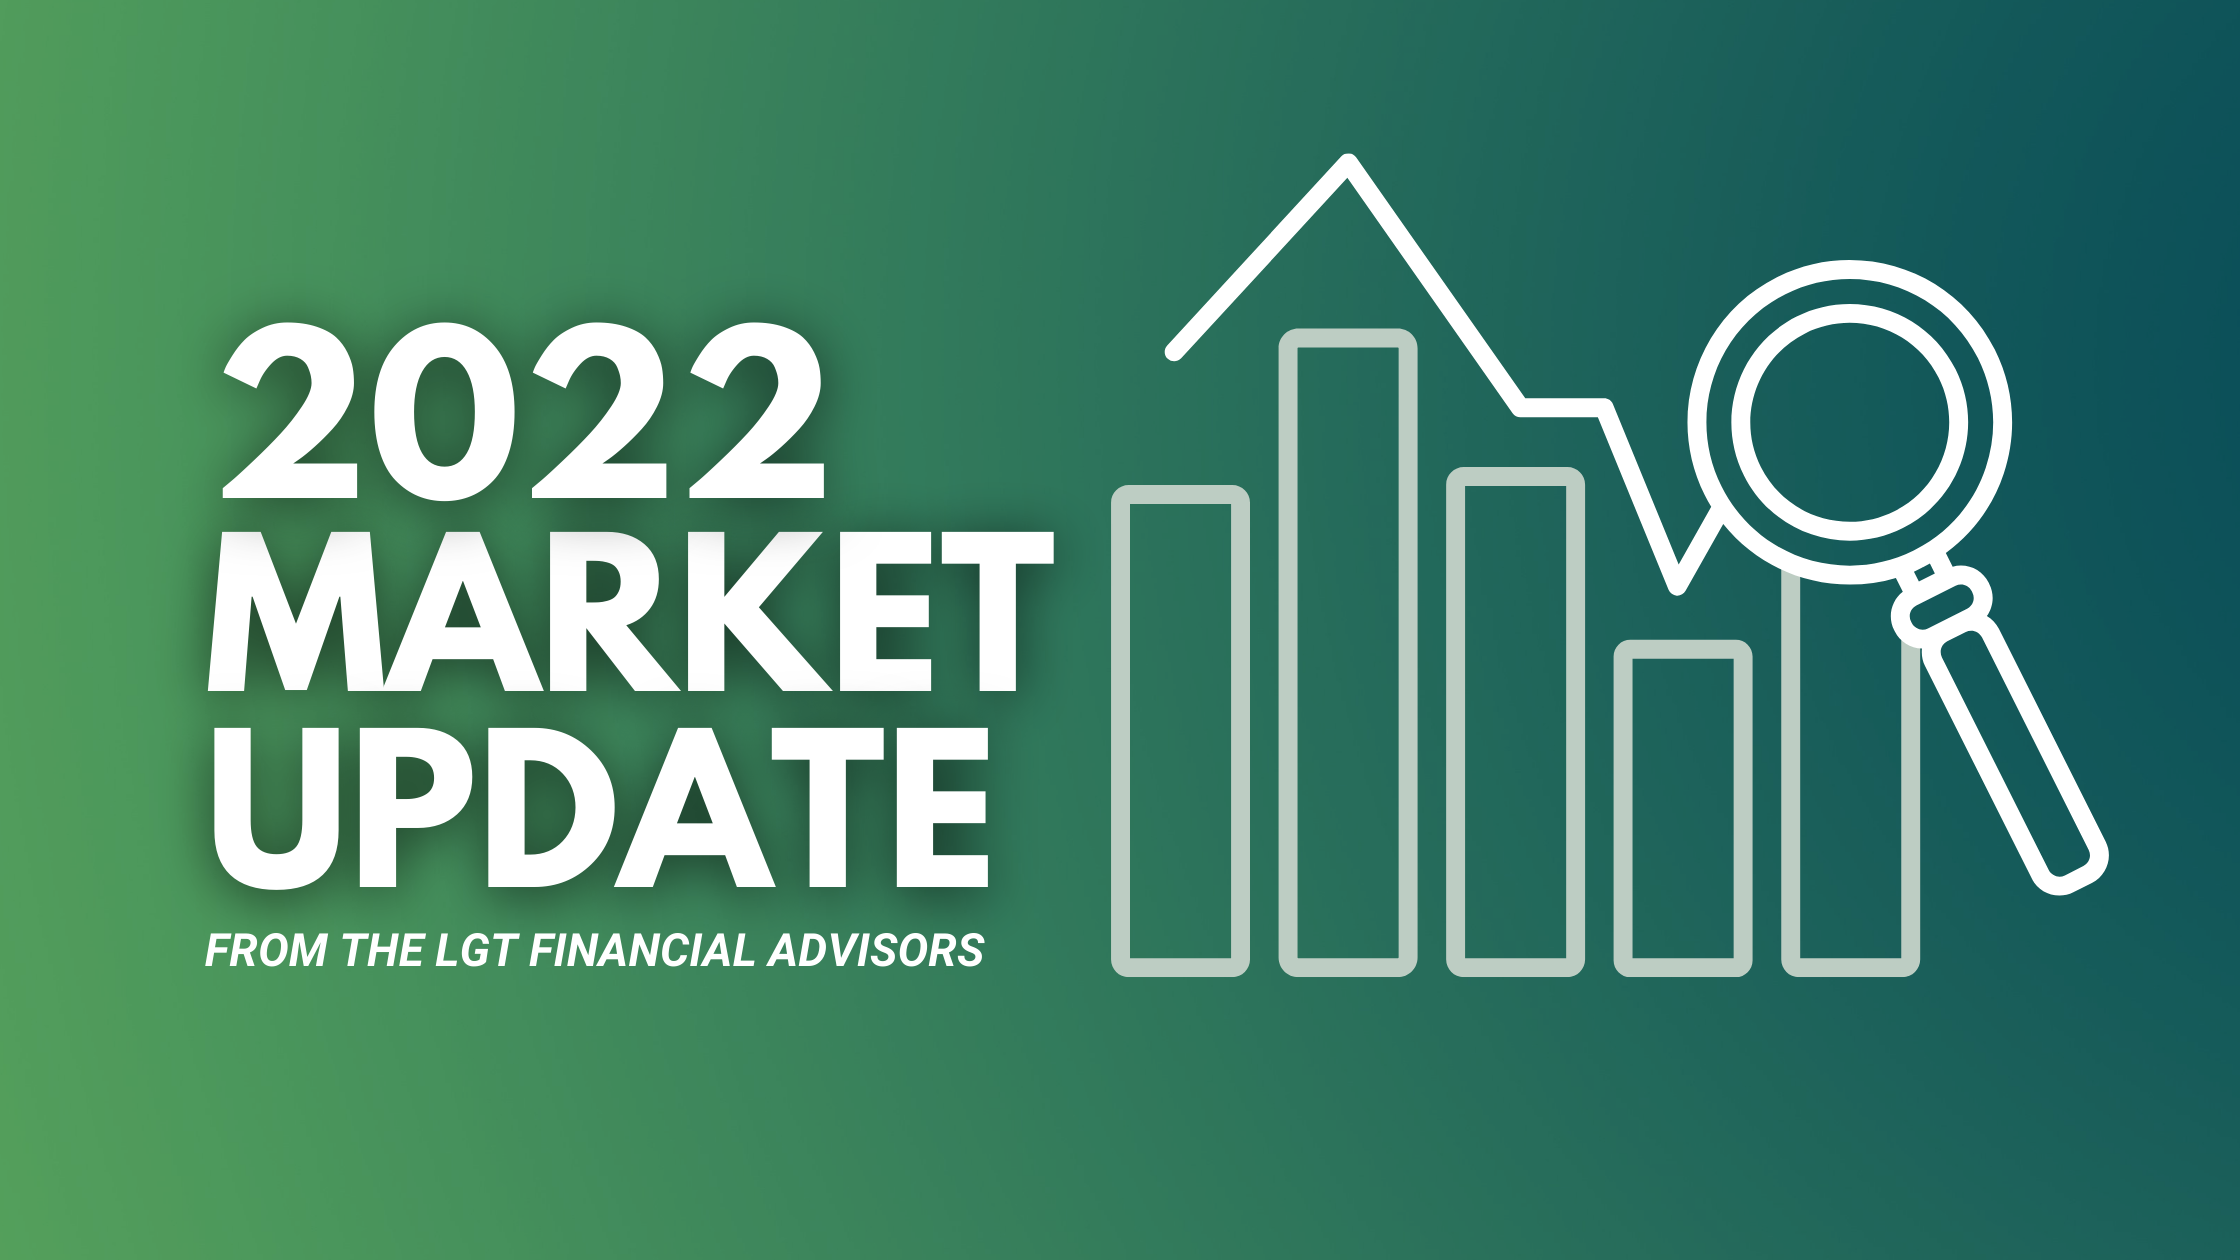 What You Need to Know About the Market in 2022